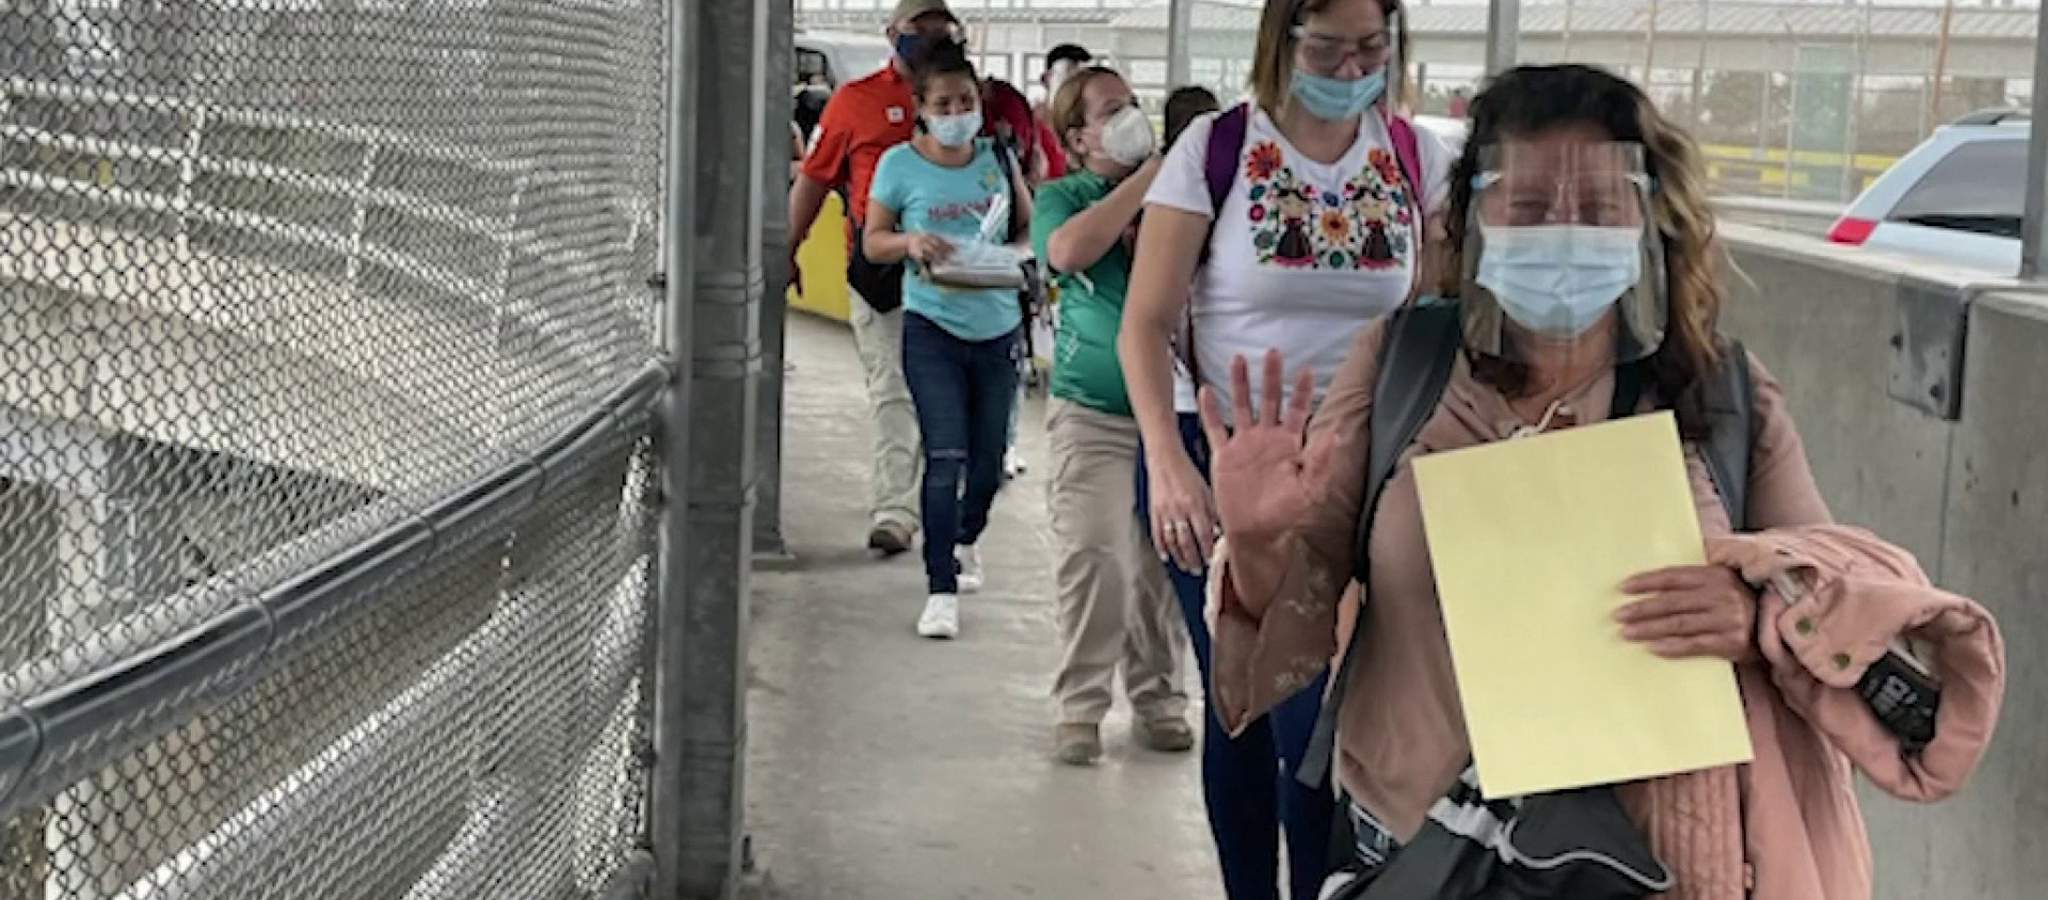 Fact-checking Gov. Abbott’s claim of migrants entering Texas border cities with virus